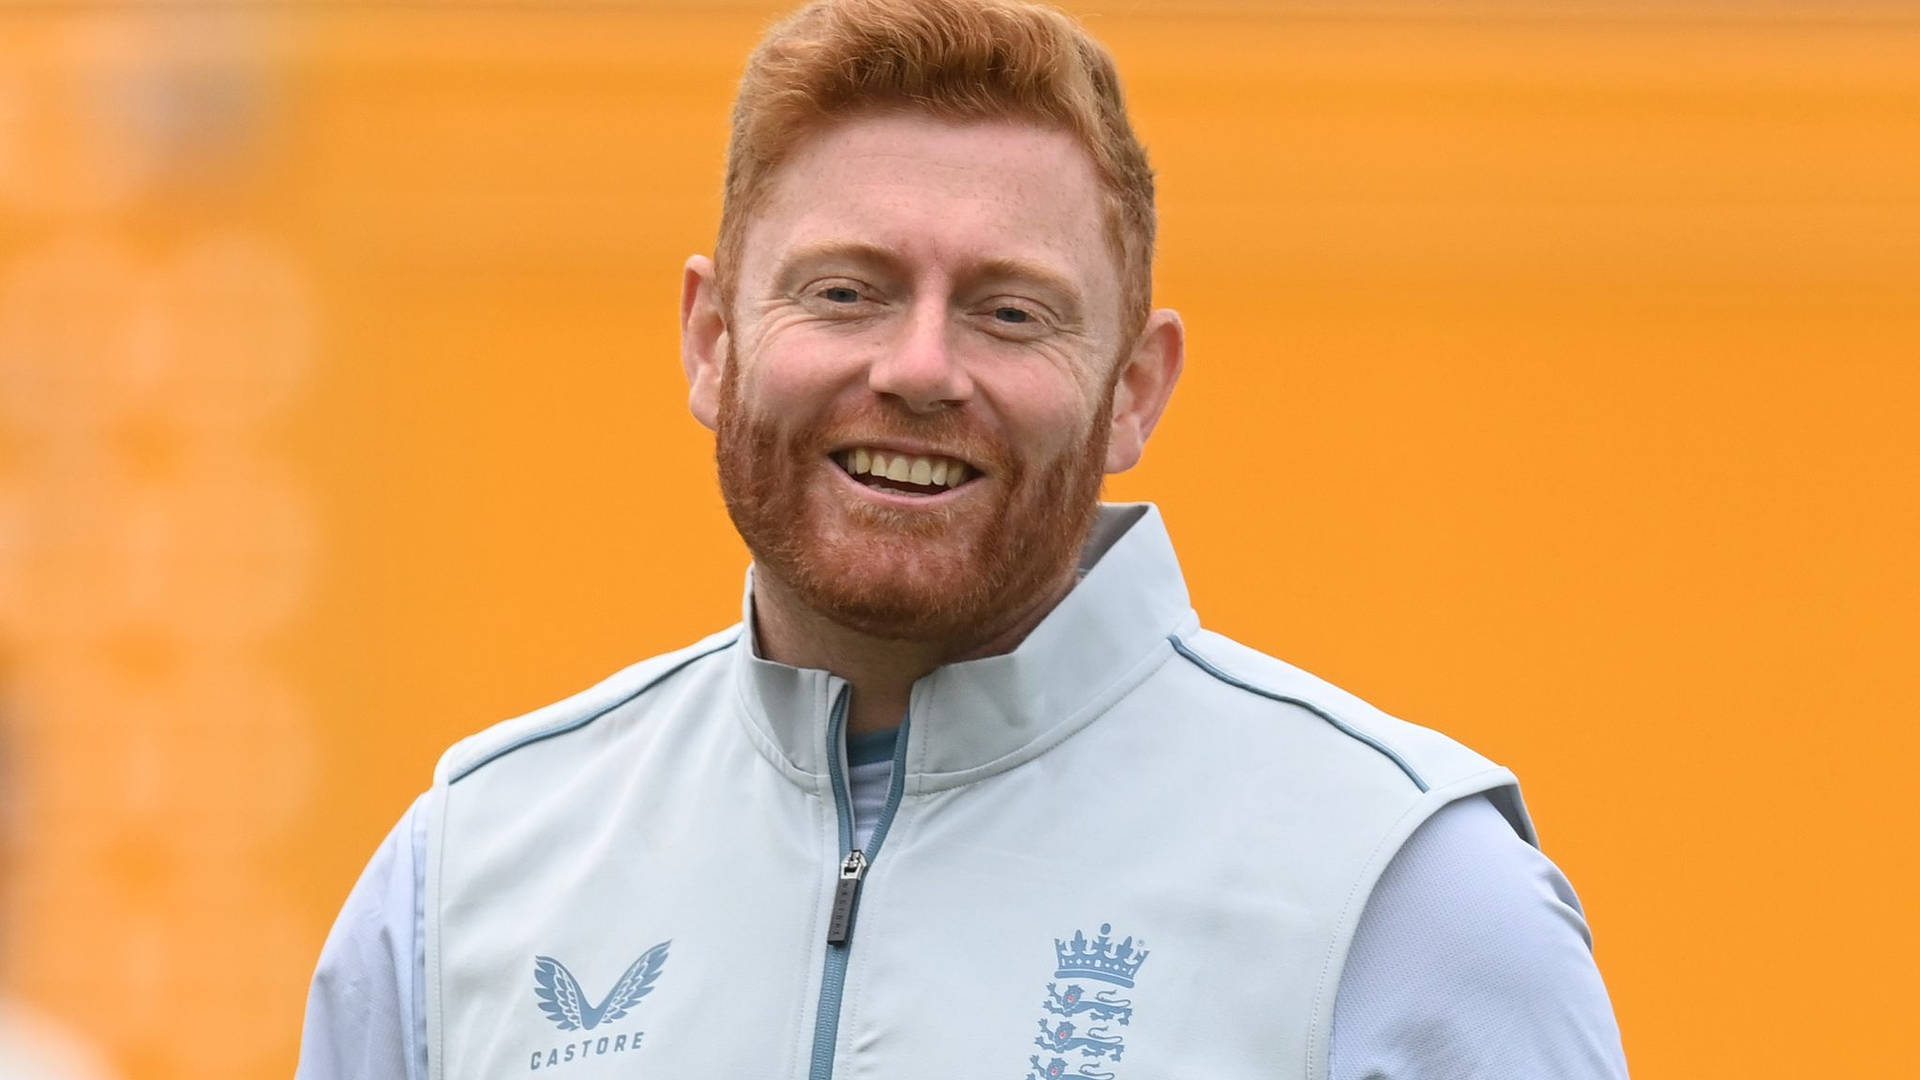 Engaging Smile Of Jonny Bairstow, The Cricket Whiz